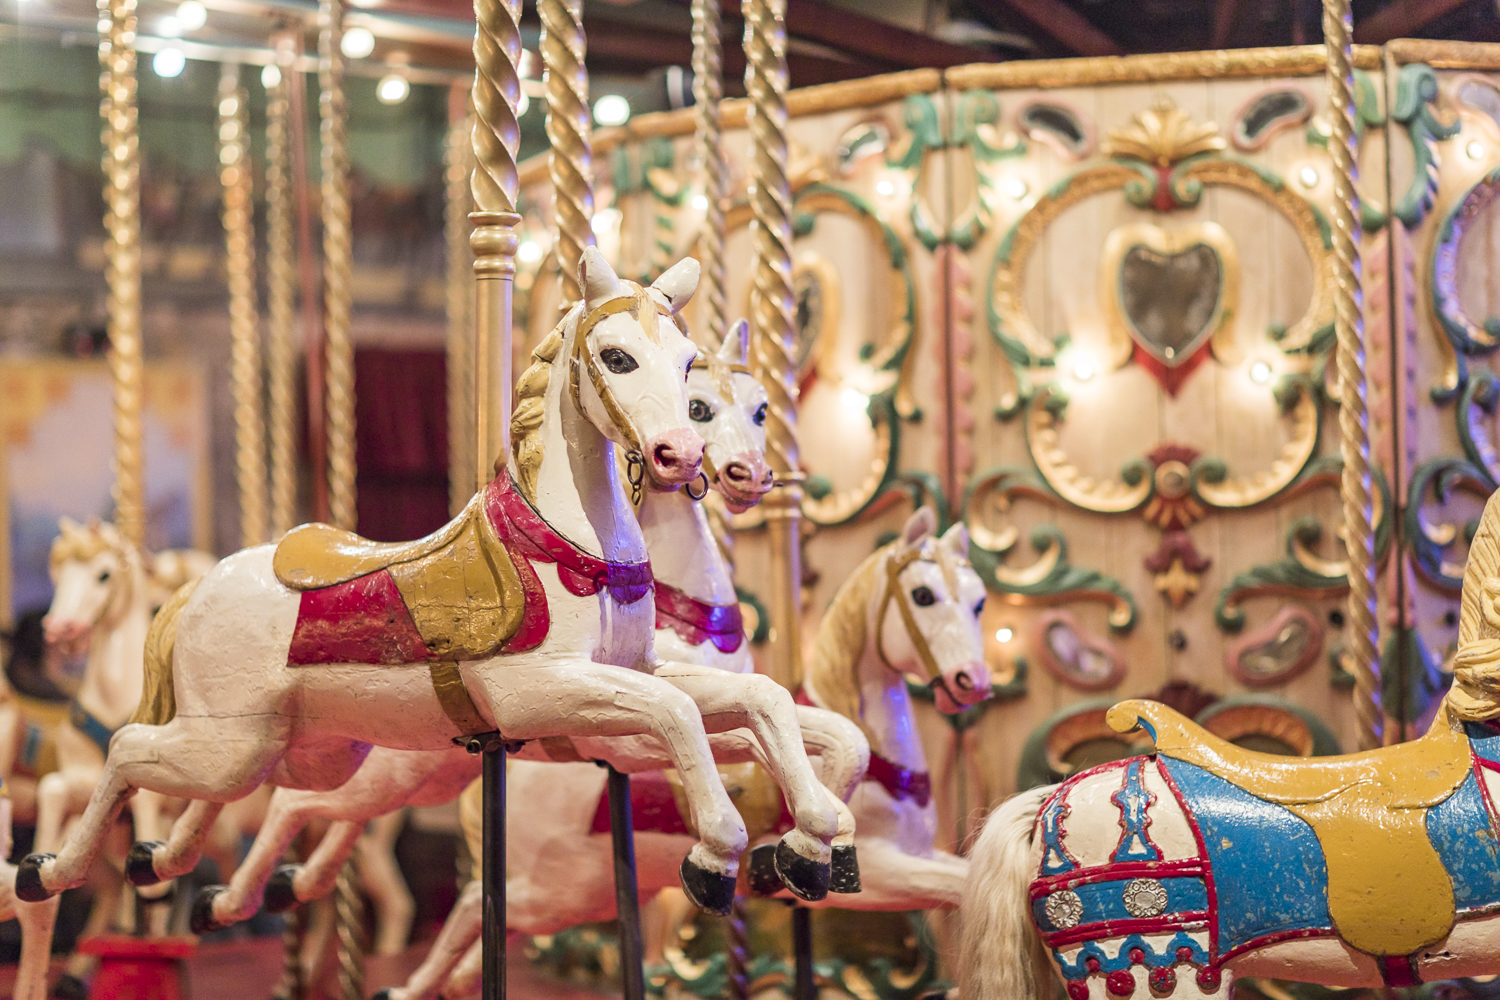  The carousels from the early 1900 Paris fairgrounds are simply beautiful. And they are not in the museum just to look at. As you will see in the video at the end of the blog post, they are in full use! 